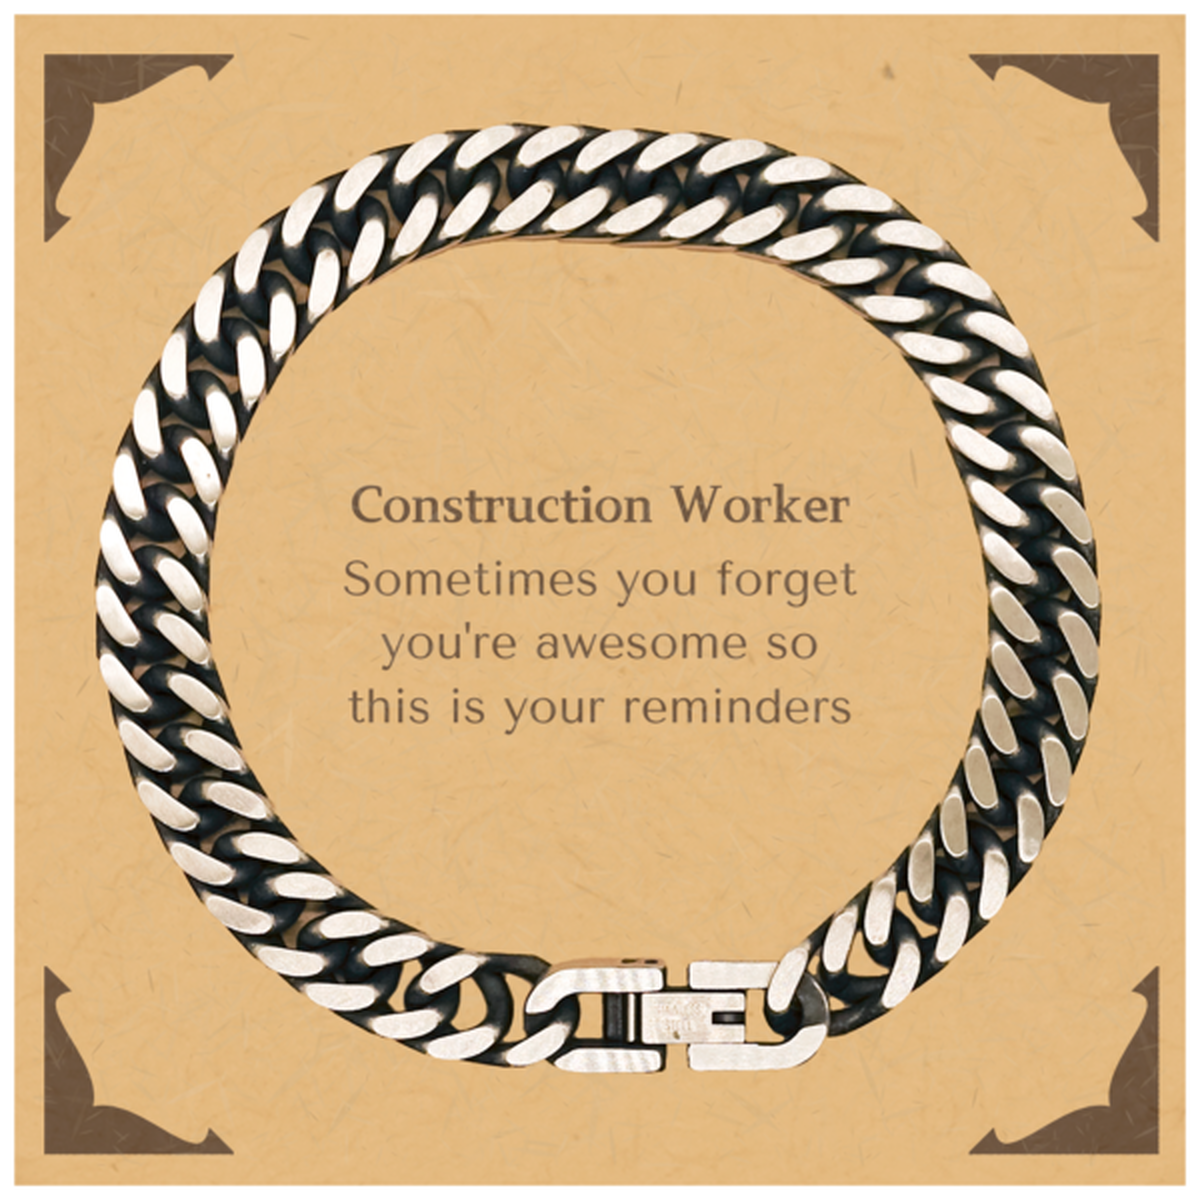 Sentimental Construction Worker Cuban Link Chain Bracelet, Construction Worker Sometimes you forget you're awesome so this is your reminders, Graduation Christmas Birthday Gifts for Construction Worker, Men, Women, Coworkers